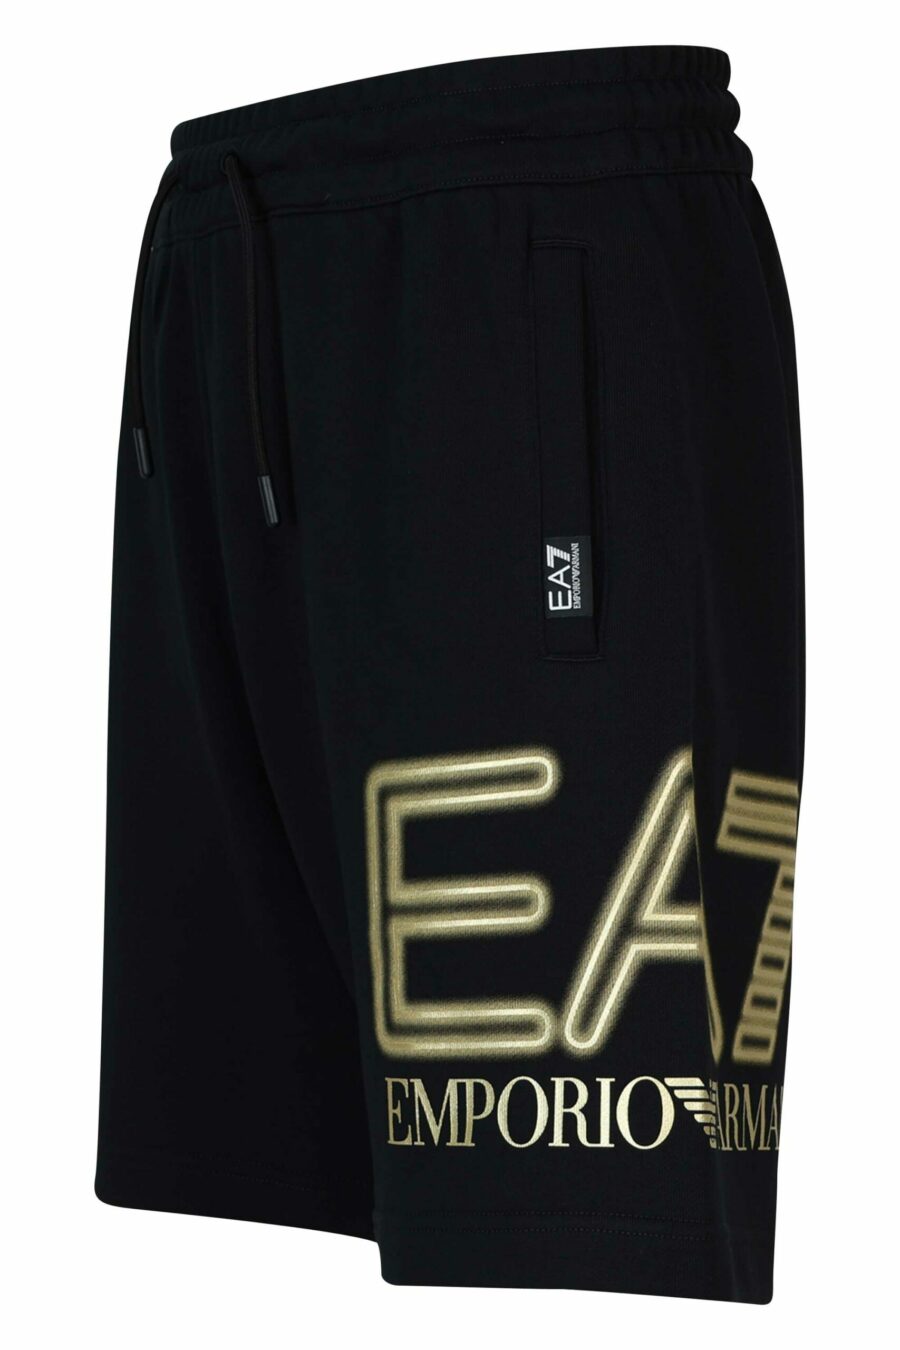 Tracksuit bottoms black with gold "lux identity" maxilogue on the side - 8058947466702 1 scaled